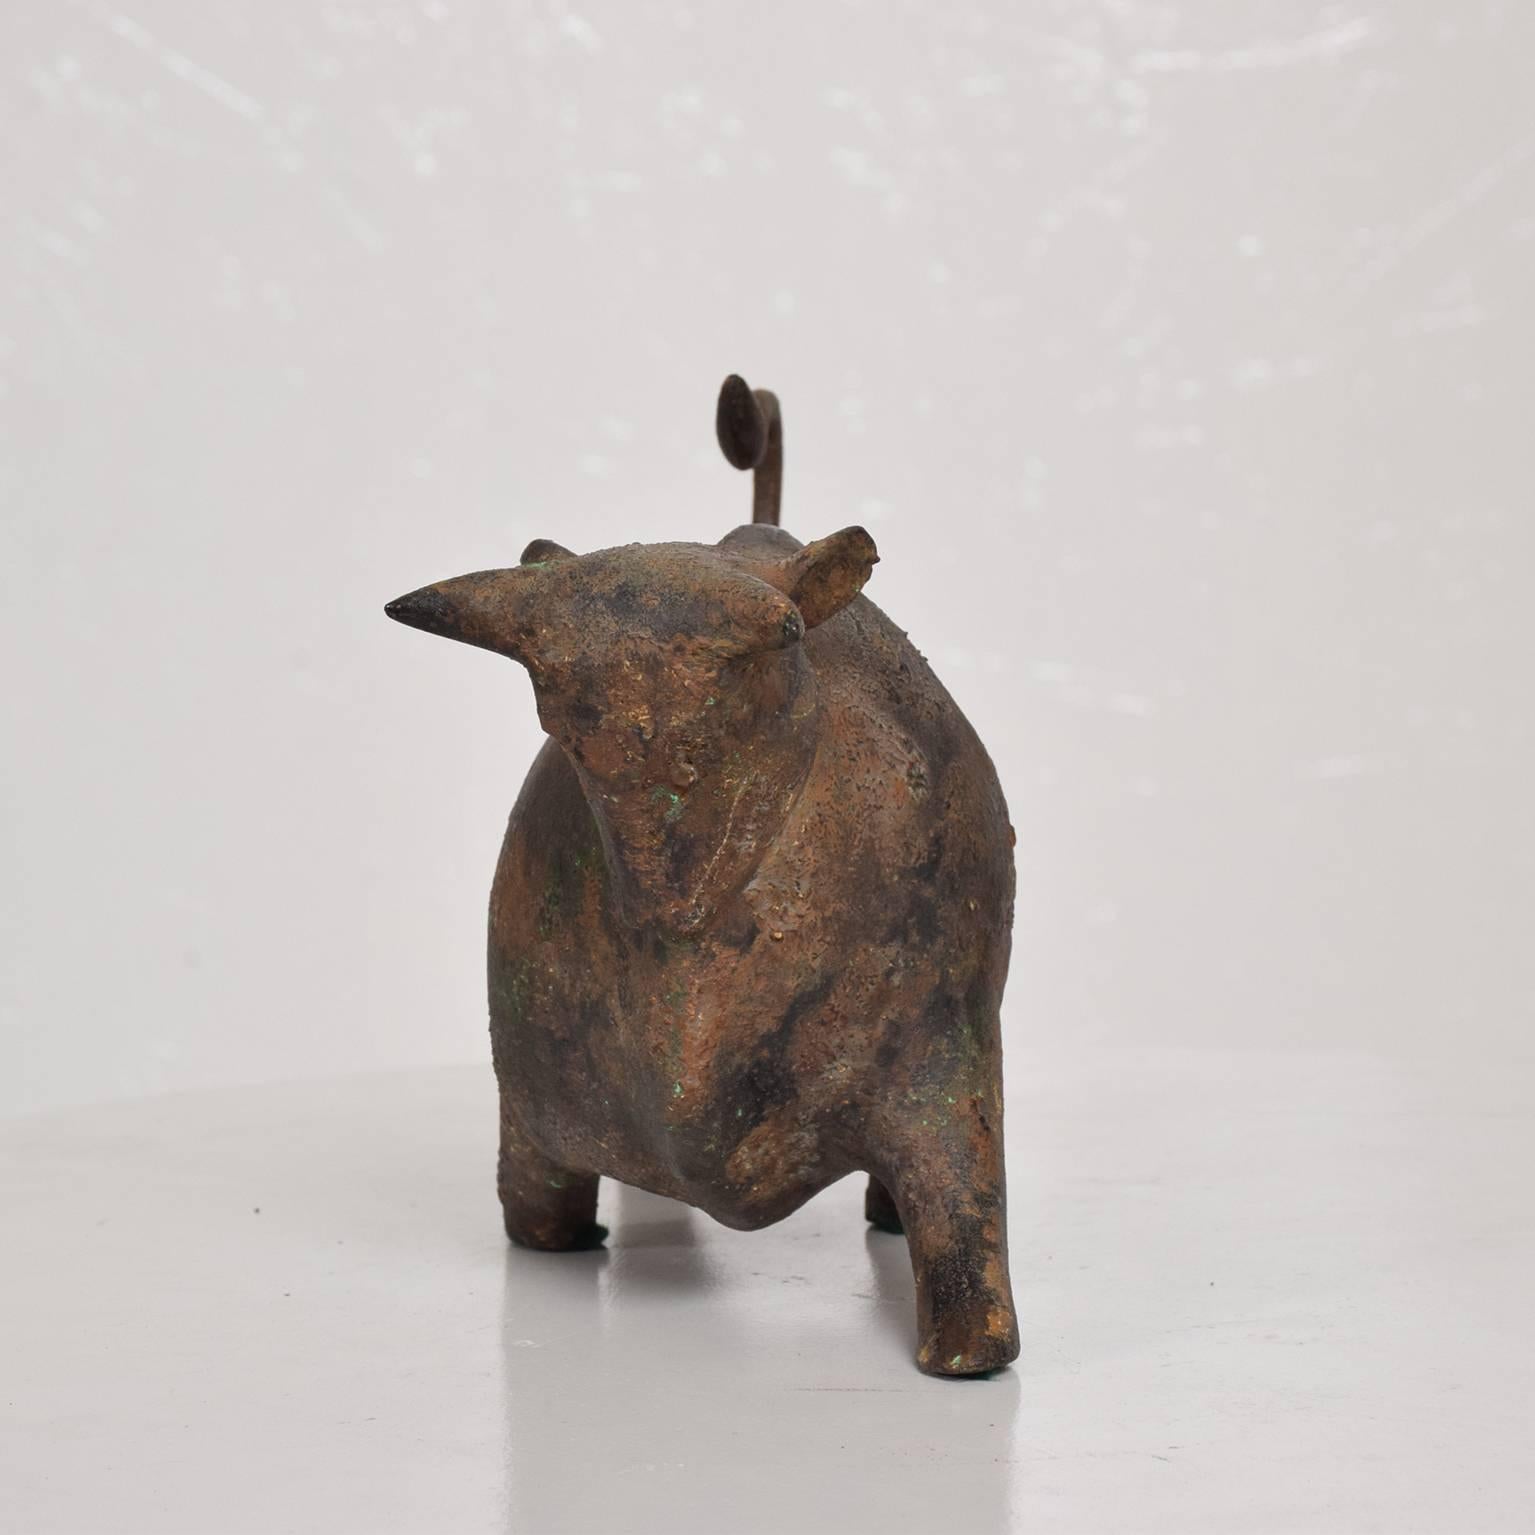 For your consideration a vintage table sculpture of a bull with amazing patina.
Dimensions: 6